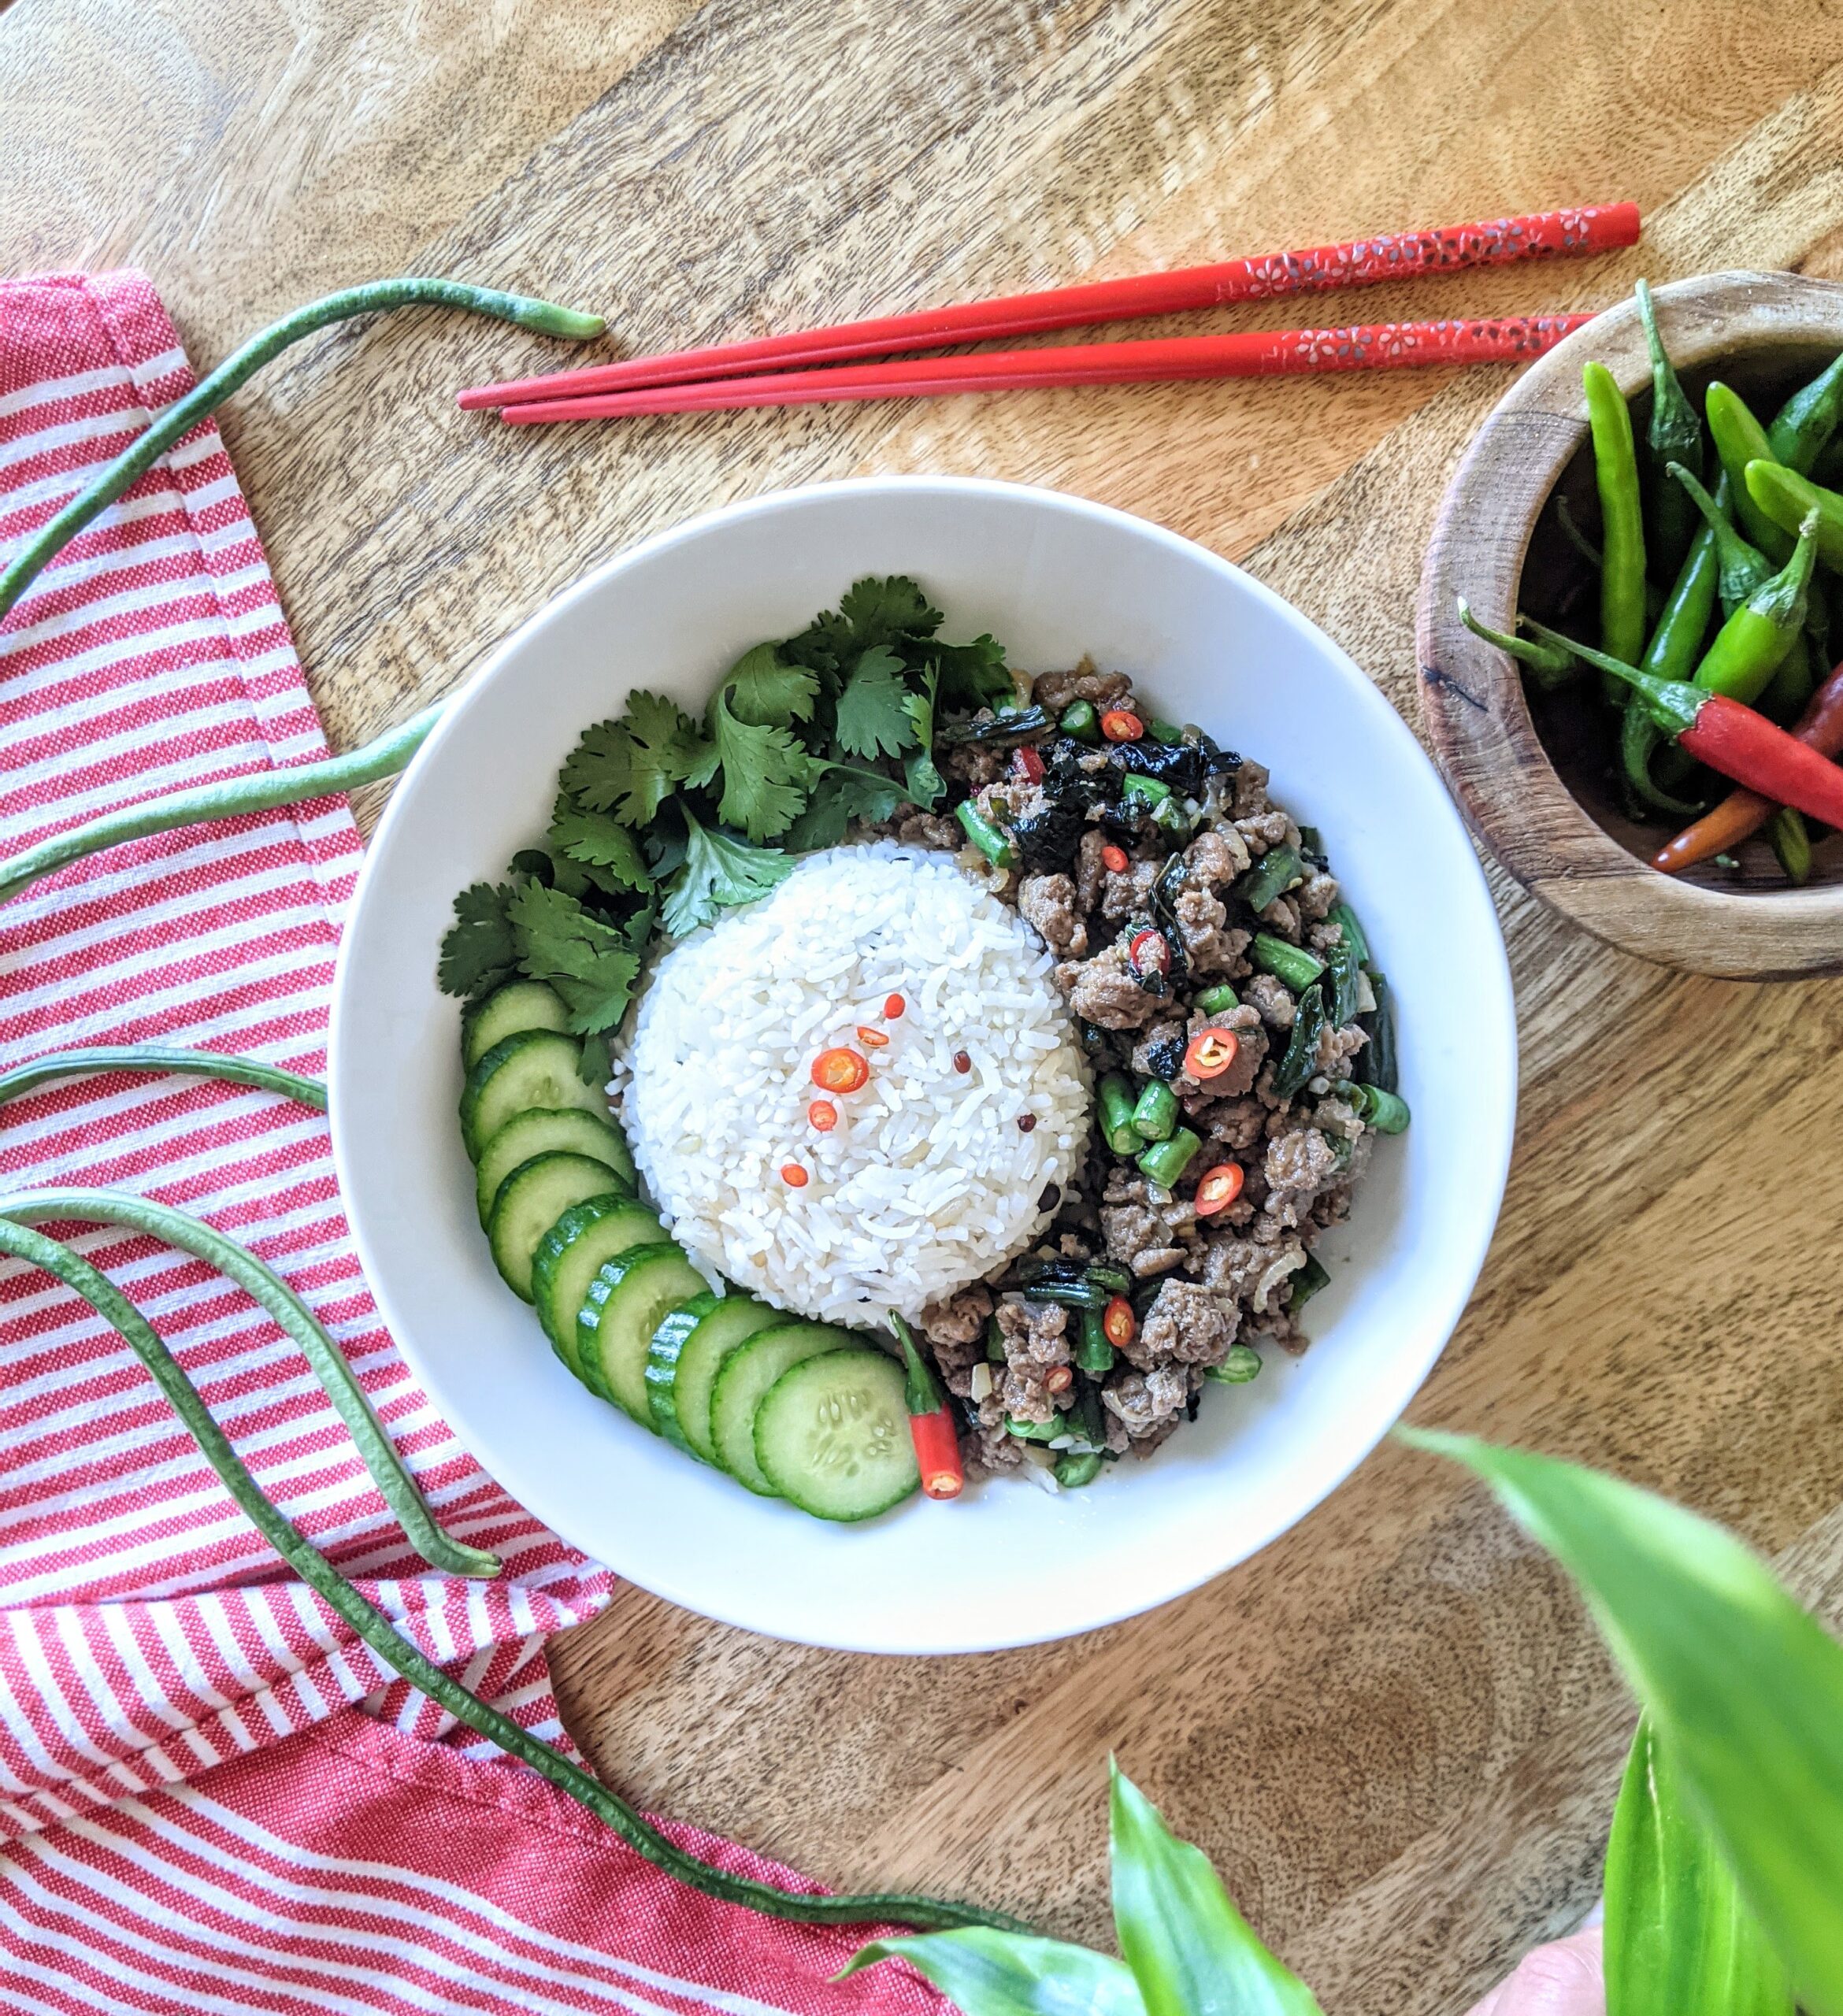 A bowl of spicy Thai basil chicken, steamed Jasmine rice, sliced cucumbers, and fresh cilantro; garnished with sliced Thai chili and fermented black garlic. Long beans and a small bowl of Thai chilies are also pictured.